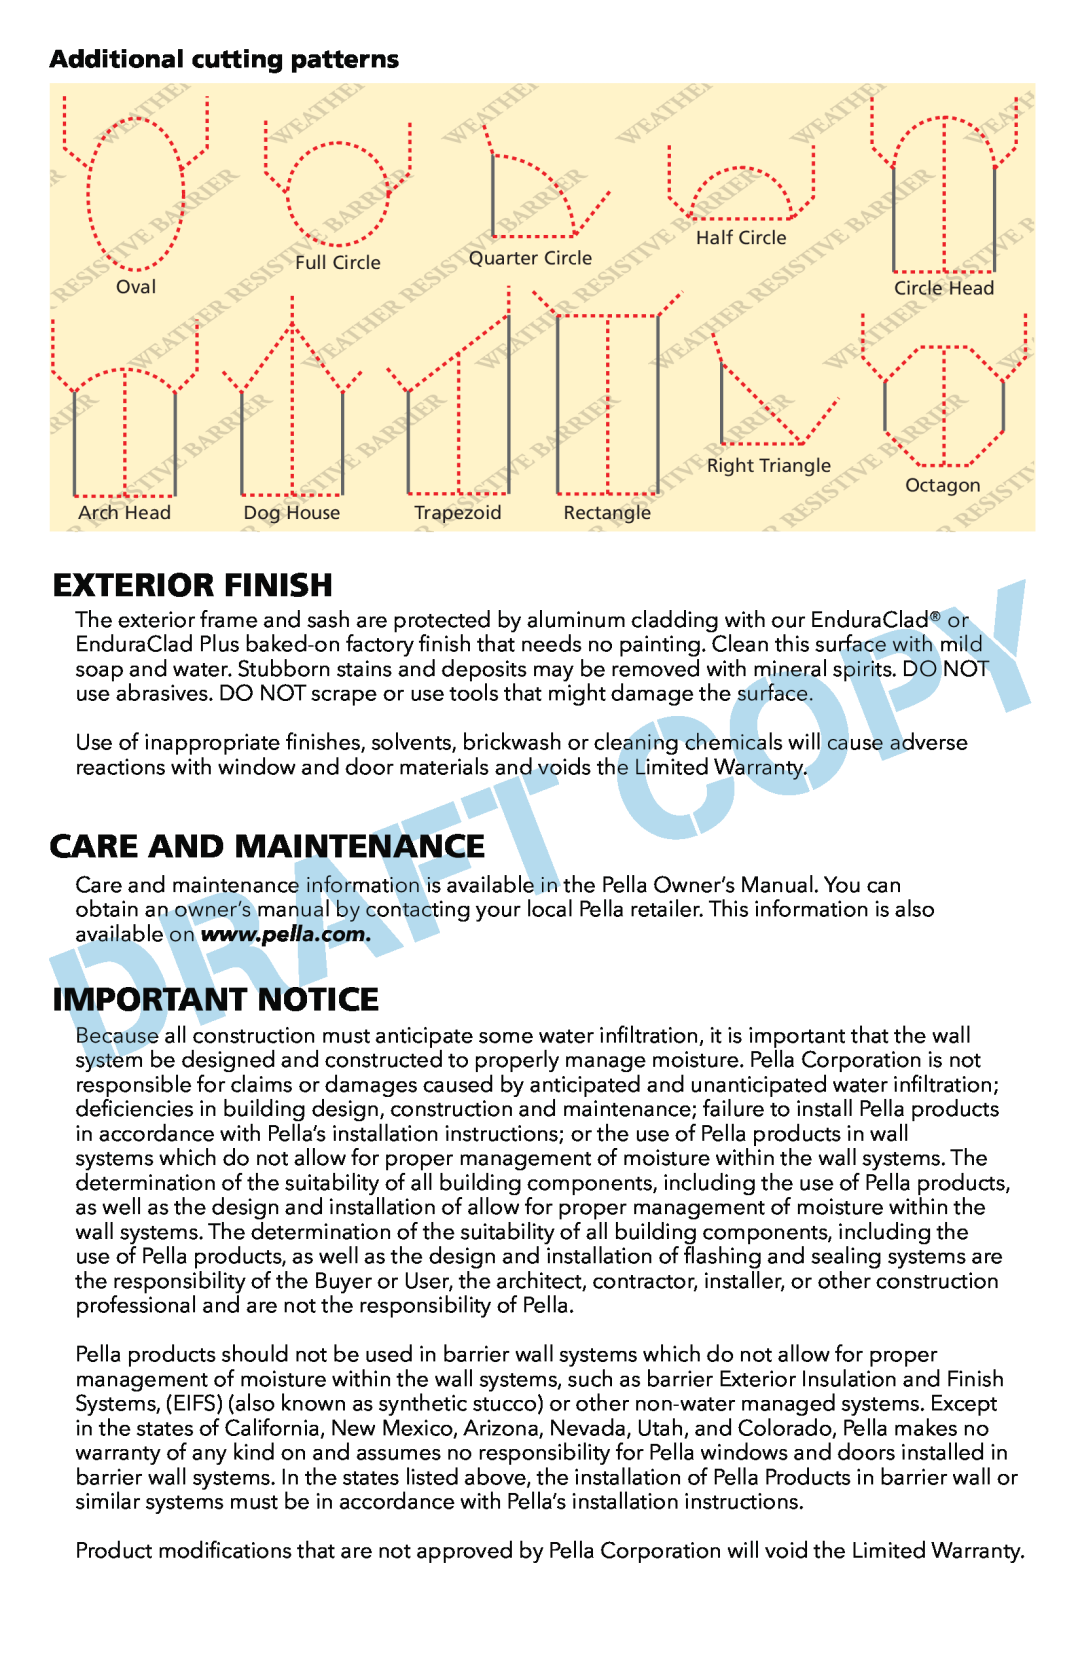 Pella 801U0103 Exterior Finish, Care And Maintenance, Important Notice, Additional cutting patterns 